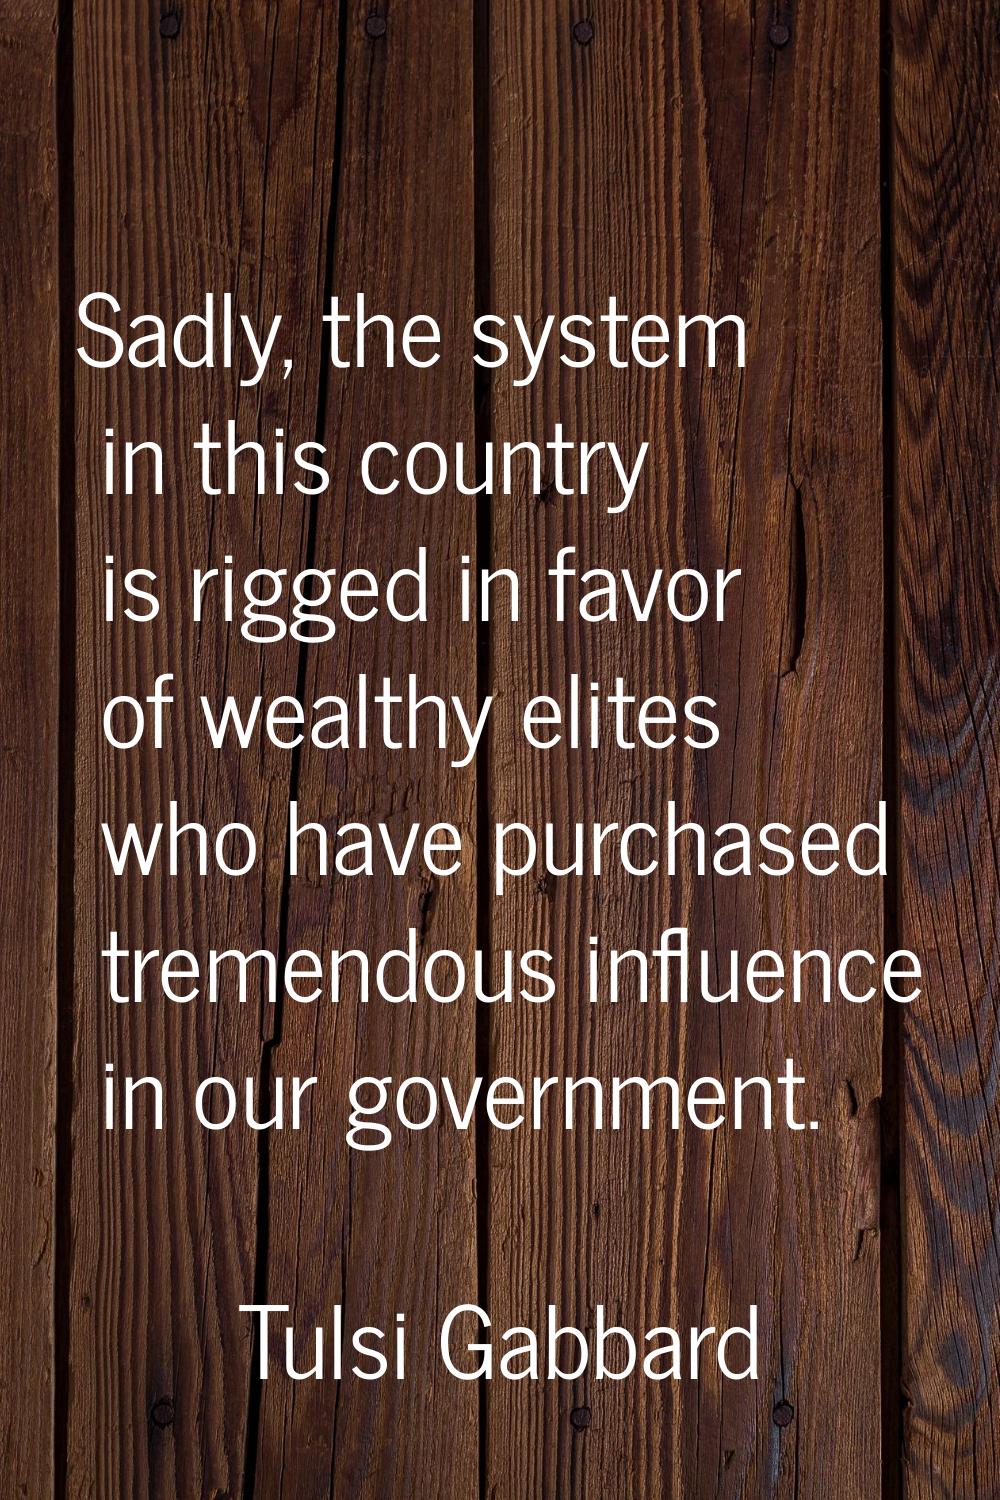 Sadly, the system in this country is rigged in favor of wealthy elites who have purchased tremendou